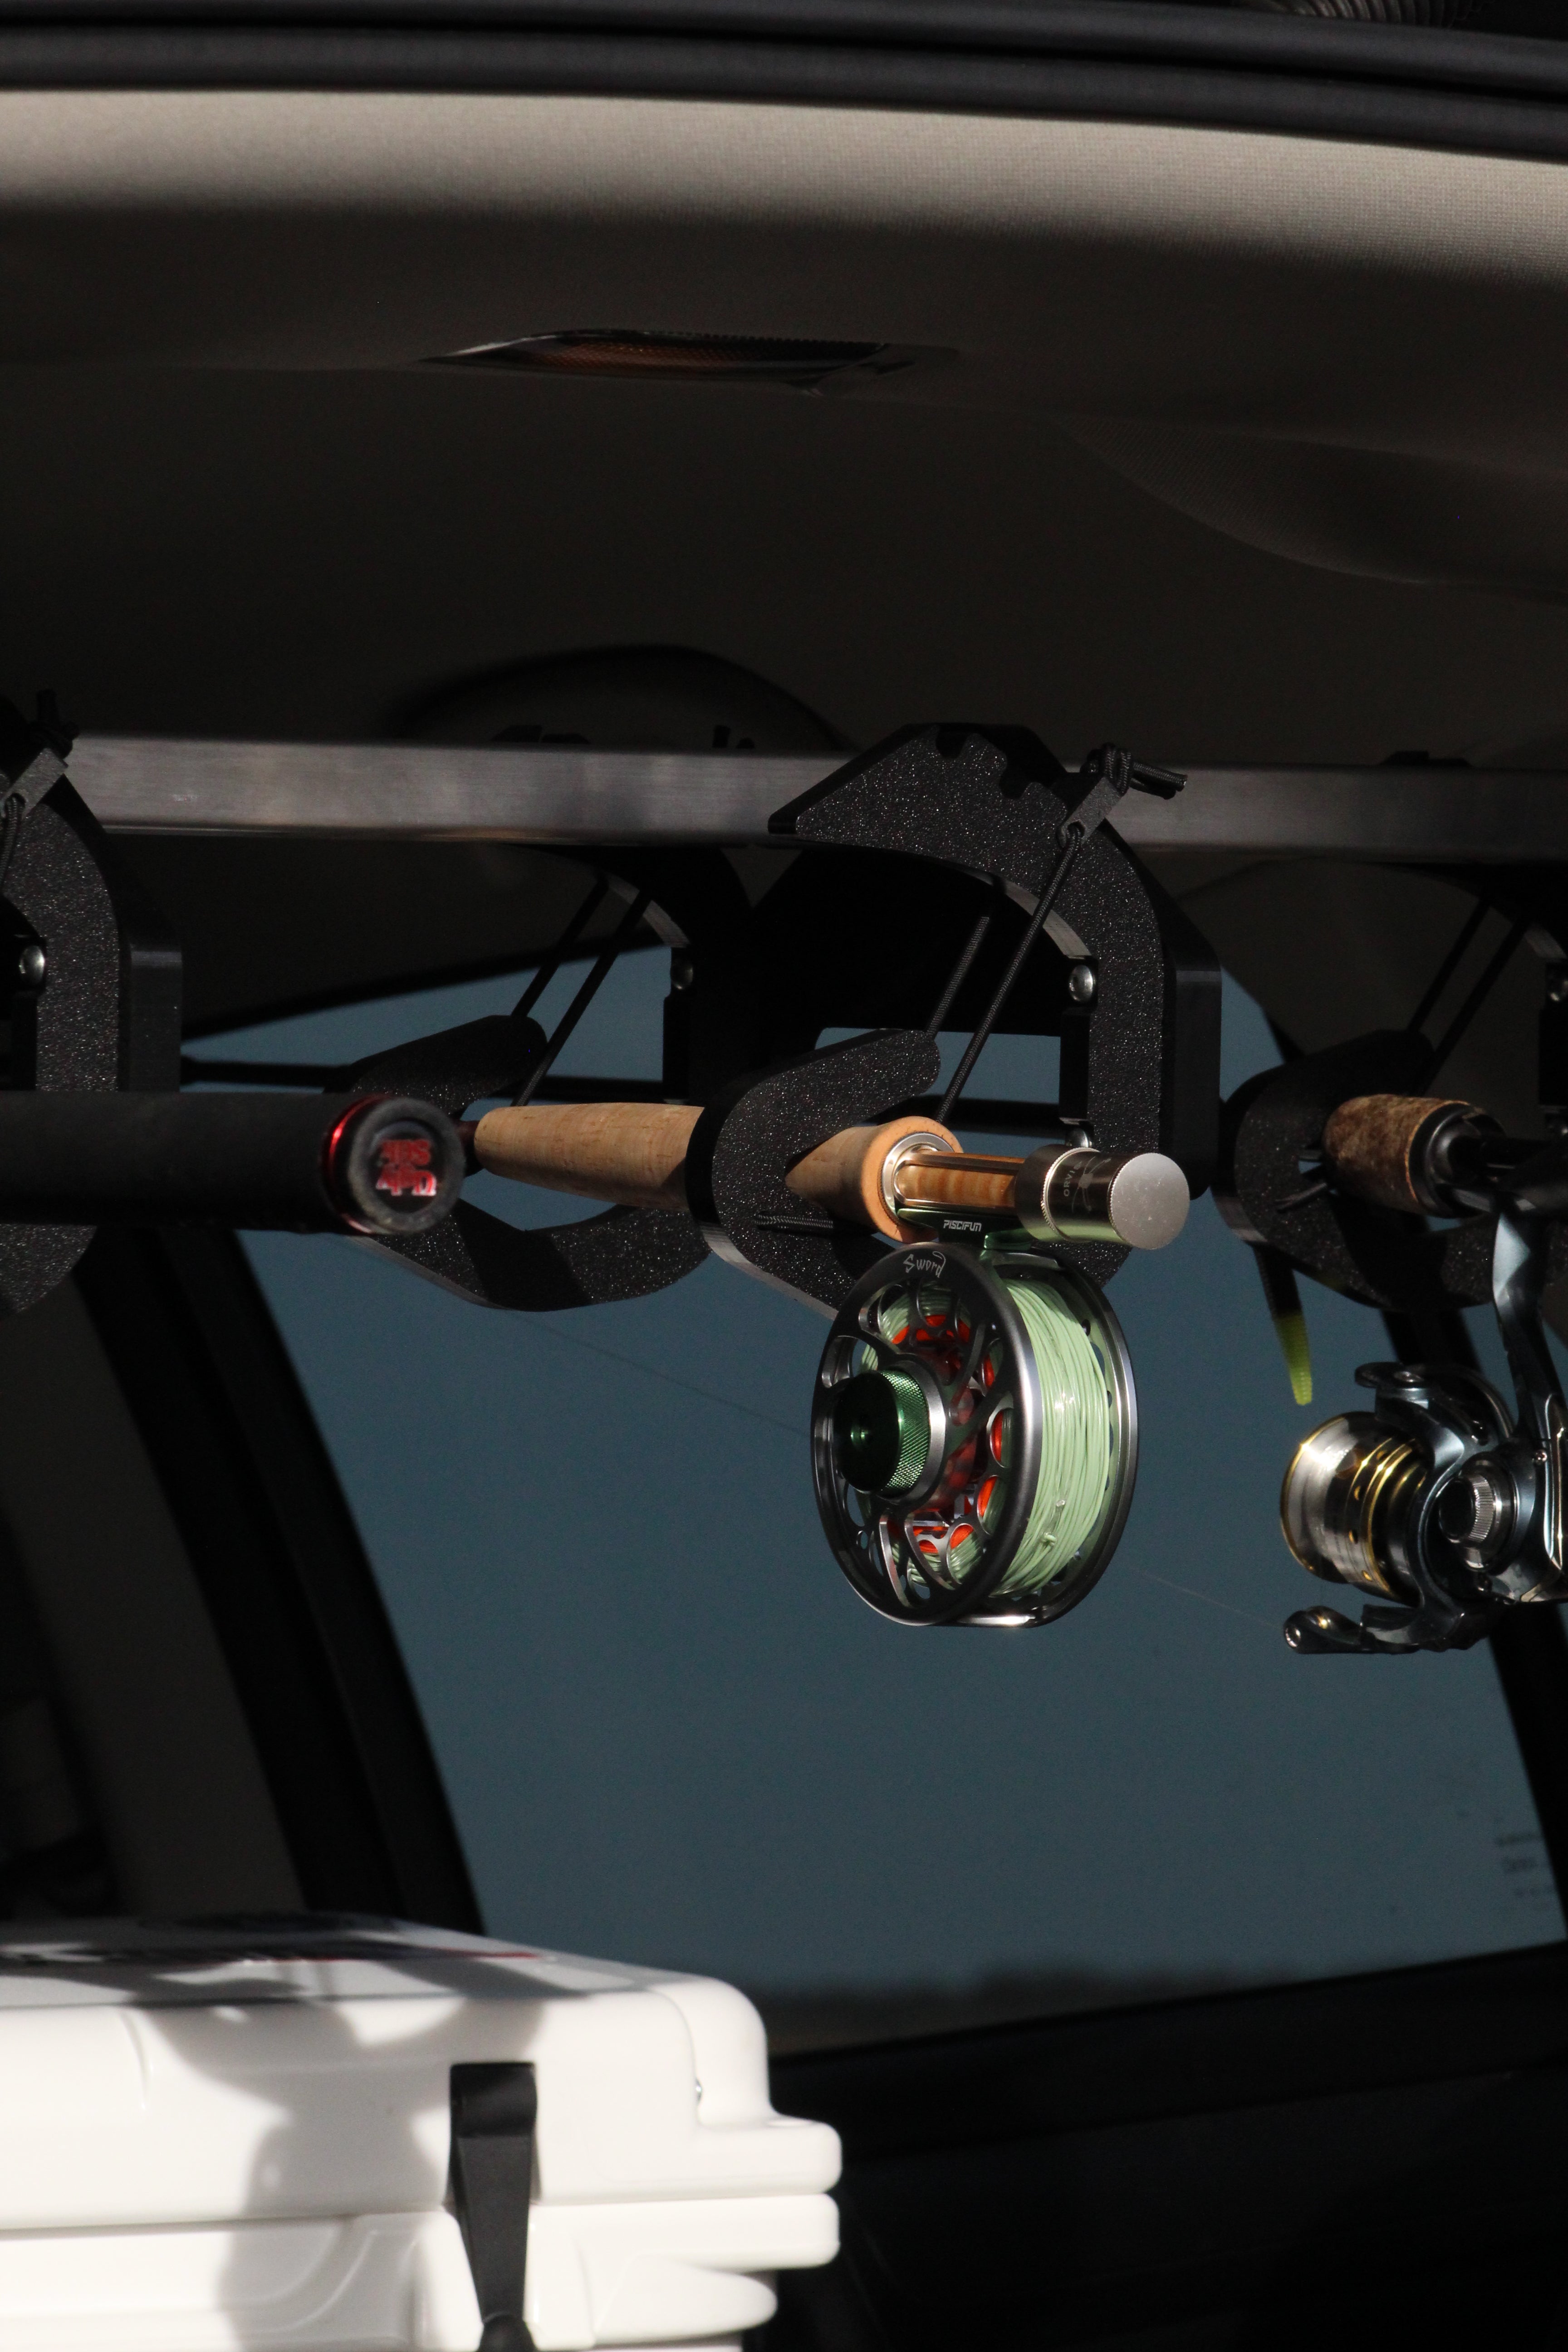 Rod Rig holding a fly rod. In-vehicle fishing rod carrier.